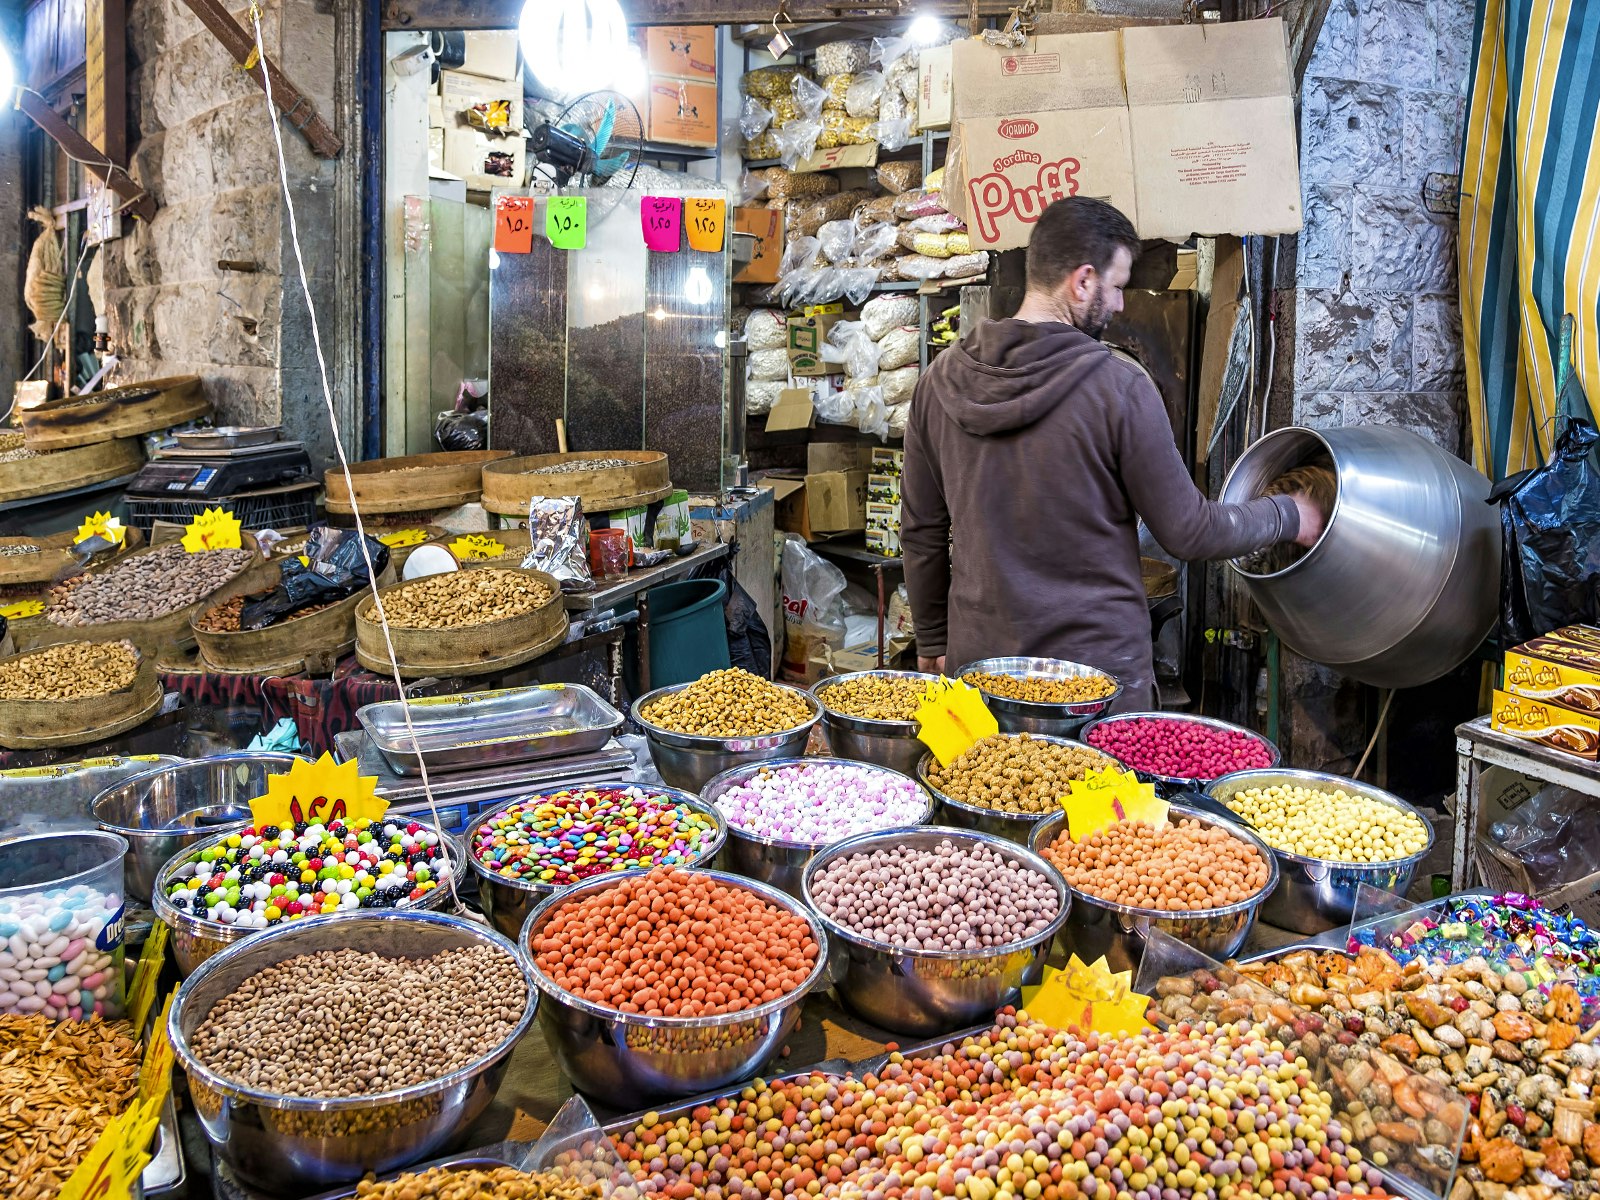 A plethora of colourful sweets on display a a sweet shop in Amman, Jordan